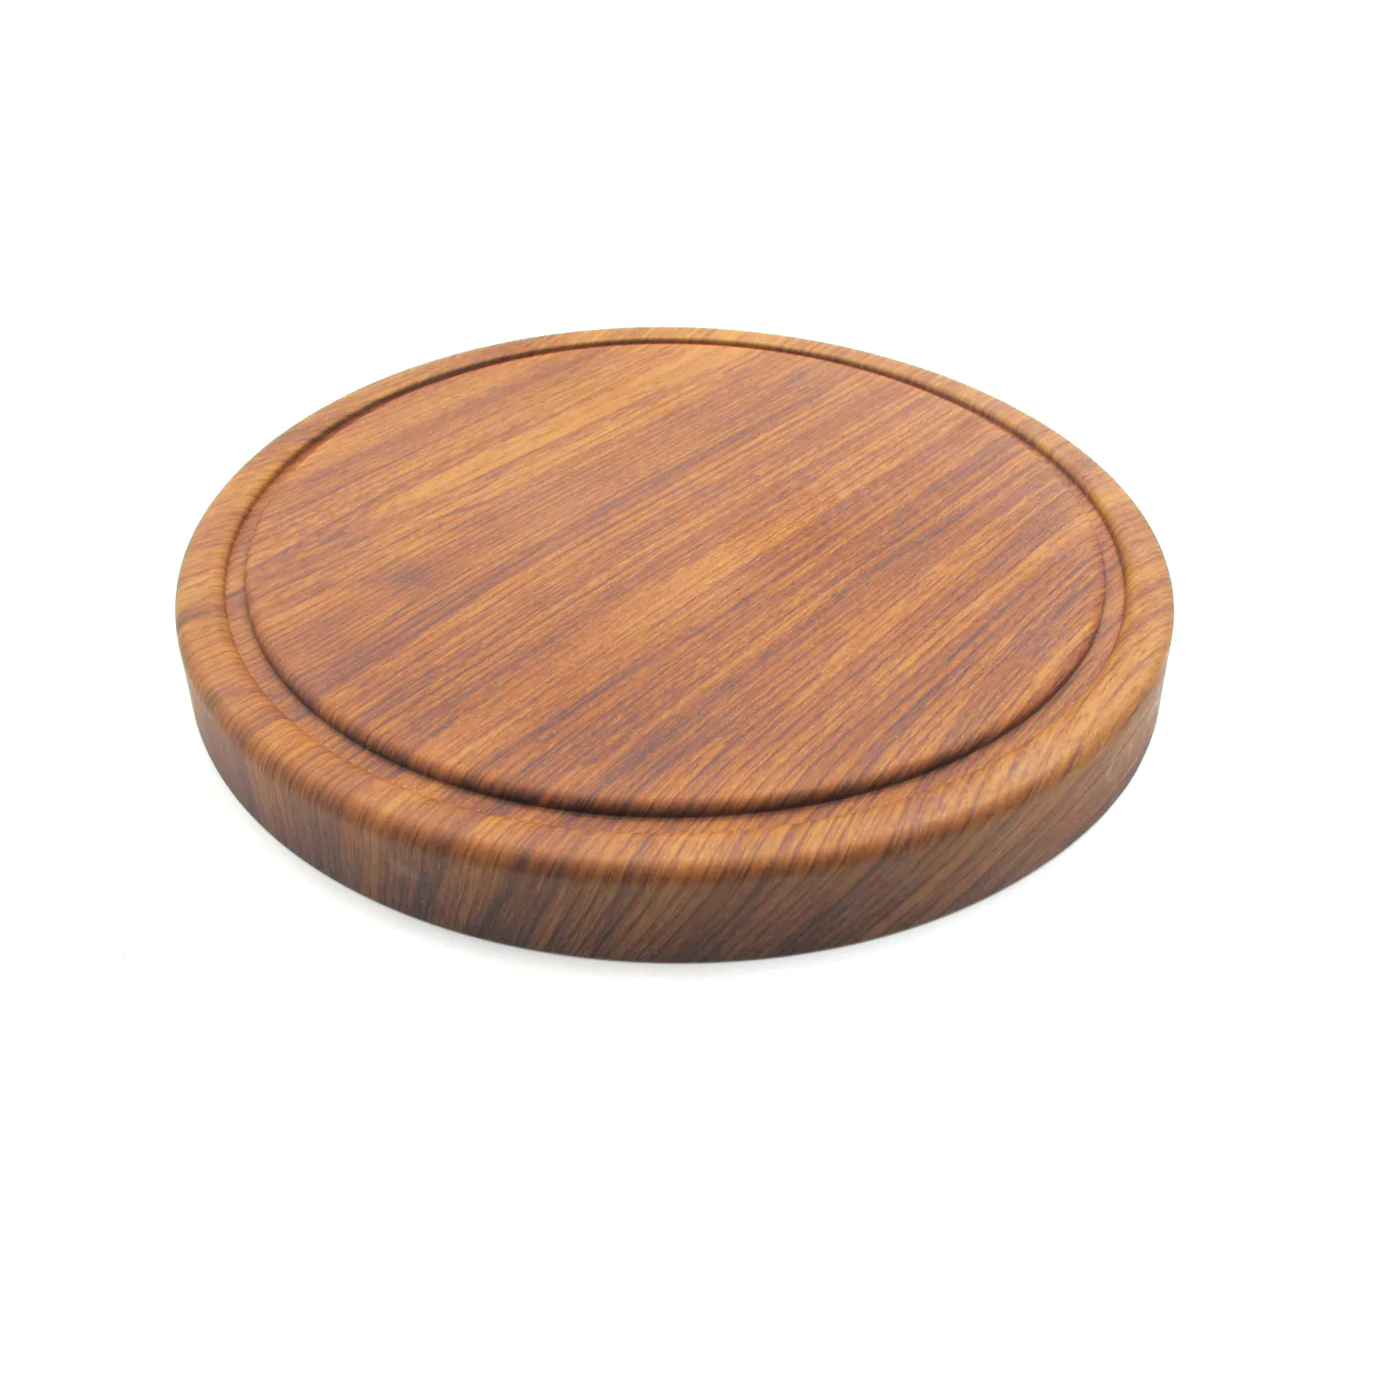 Round Display Board with Wooden Finish - Lunaz Shop